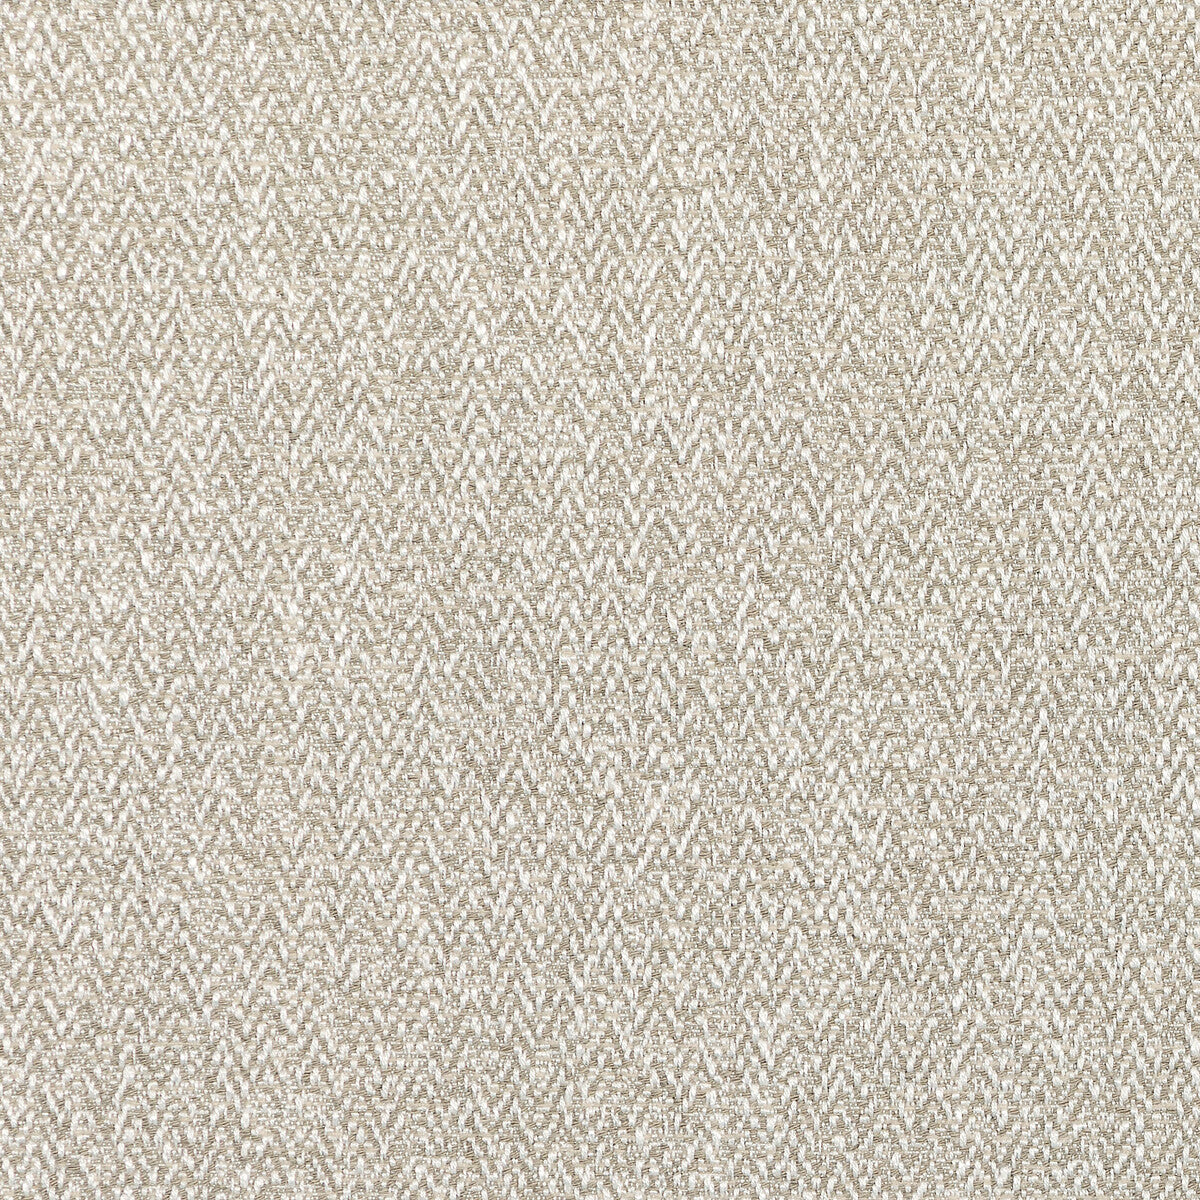 Saumur fabric in natural color - pattern 36107.106.0 - by Kravet Couture in the Luxury Textures II collection